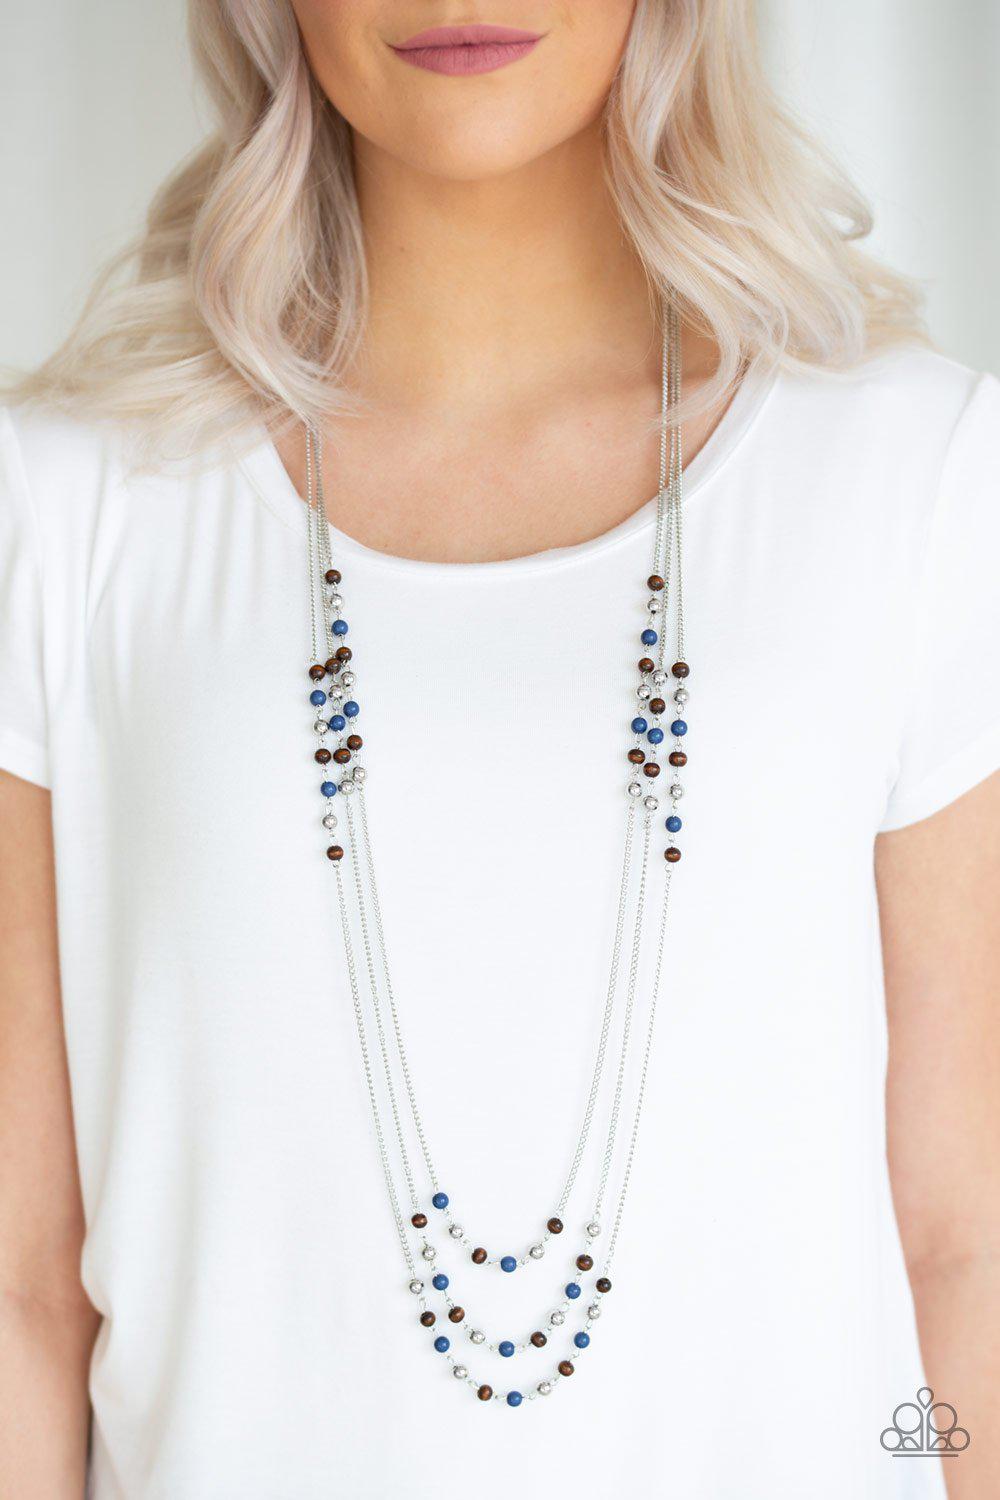 Seasonal Sensation Blue, Wood and Silver Necklace - Paparazzi Accessories- model - CarasShop.com - $5 Jewelry by Cara Jewels